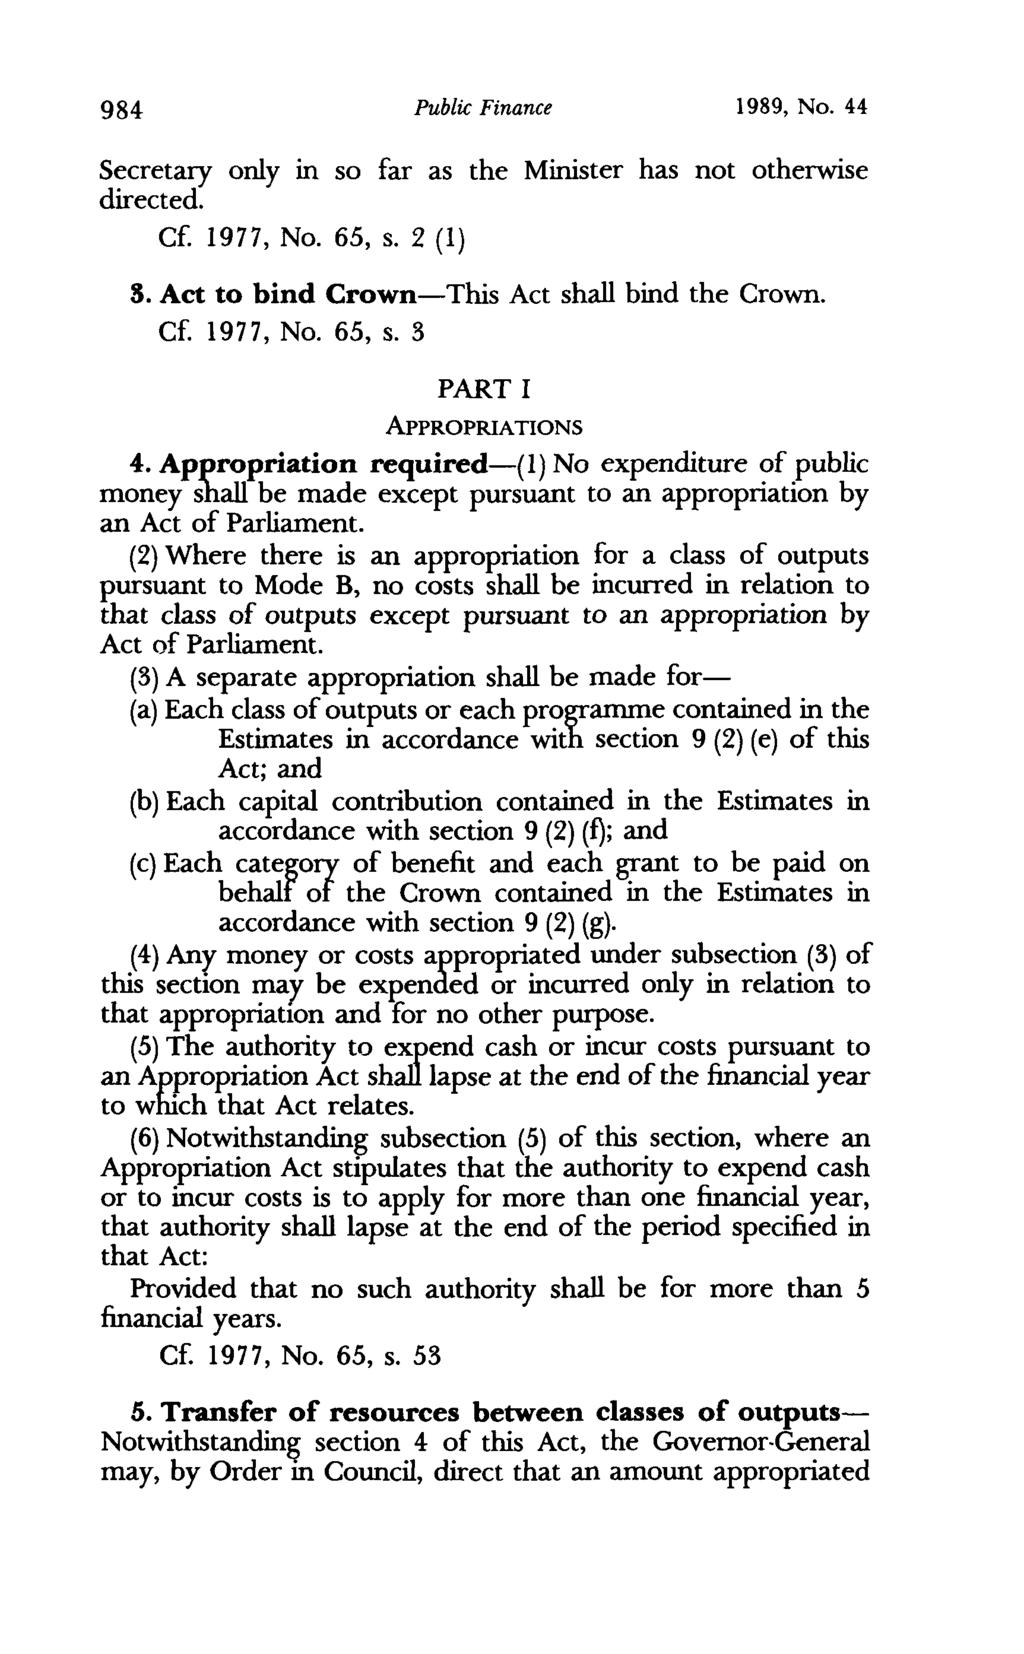 984 Public Finance 1989, No. 44 Secretary only in so far as the Minister has not otherwise directed. Cr. 1977, No. 65, s. 2 (1) S. Act to bind Crown-This Act shall bind the Crown. Cr. 1977, No. 65, s. 3 PART I ApPROPRIATIONS 4.